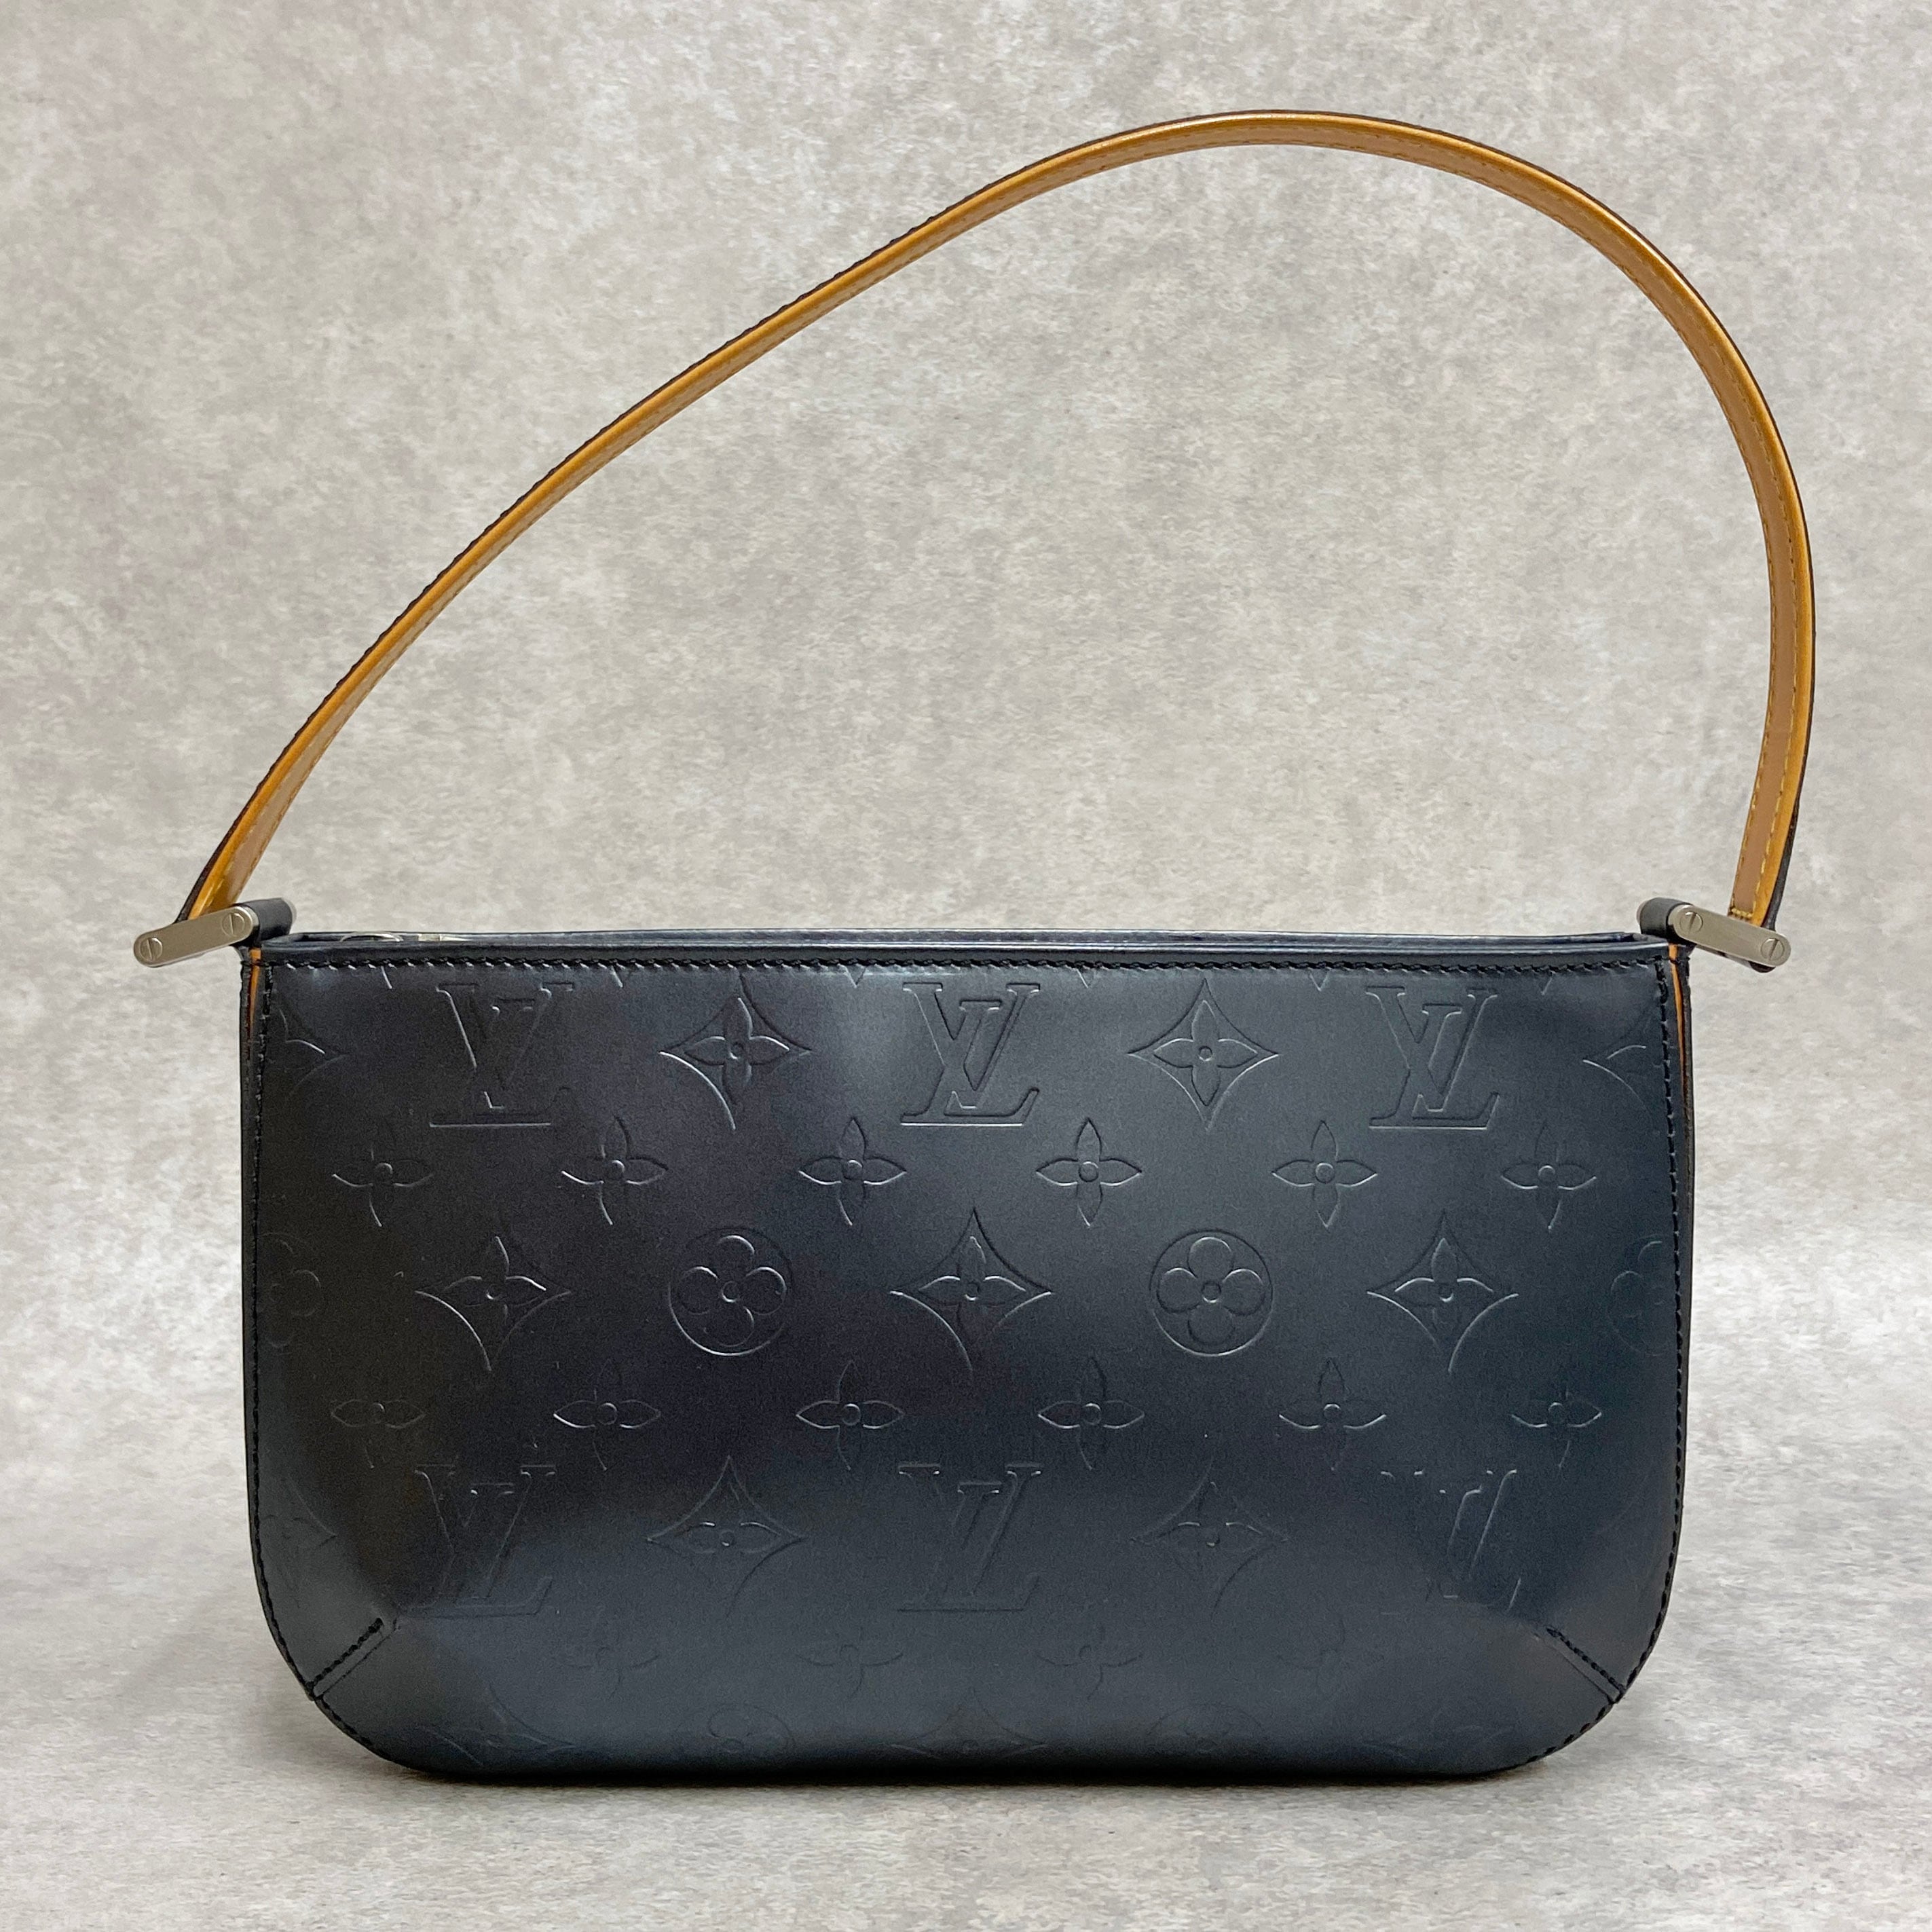 Reserved items※ LOUIS VUITTON ルイ・ヴィトン モノグラム・マット